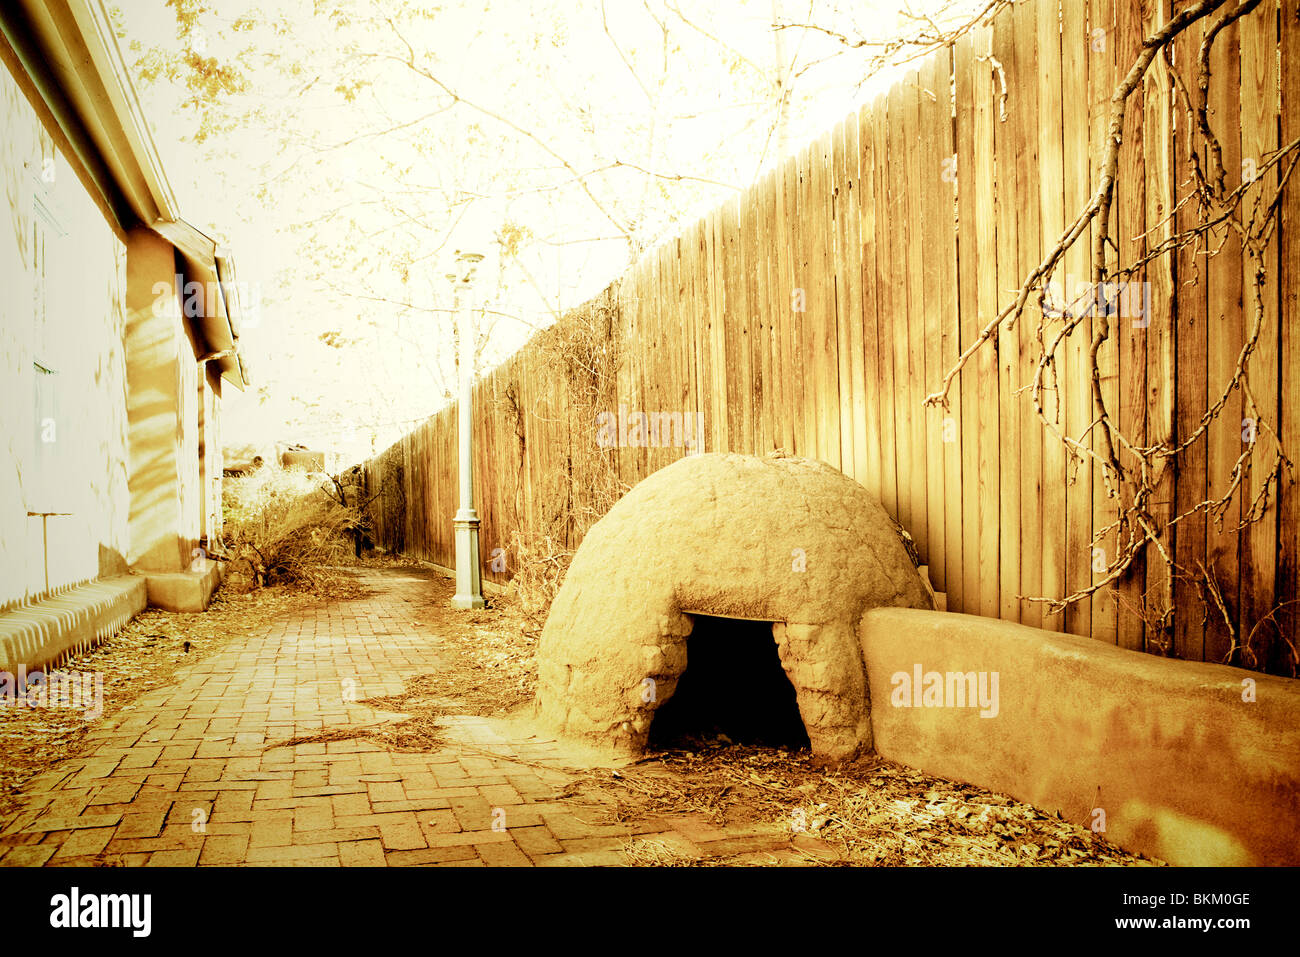 SIDE STREET AND A TRADITIONAL OUTDOOR OVEN IN OLD TOWN IN ALBUQUERQUE, NEW MEXICO, USA IN LATE FALL Stock Photo